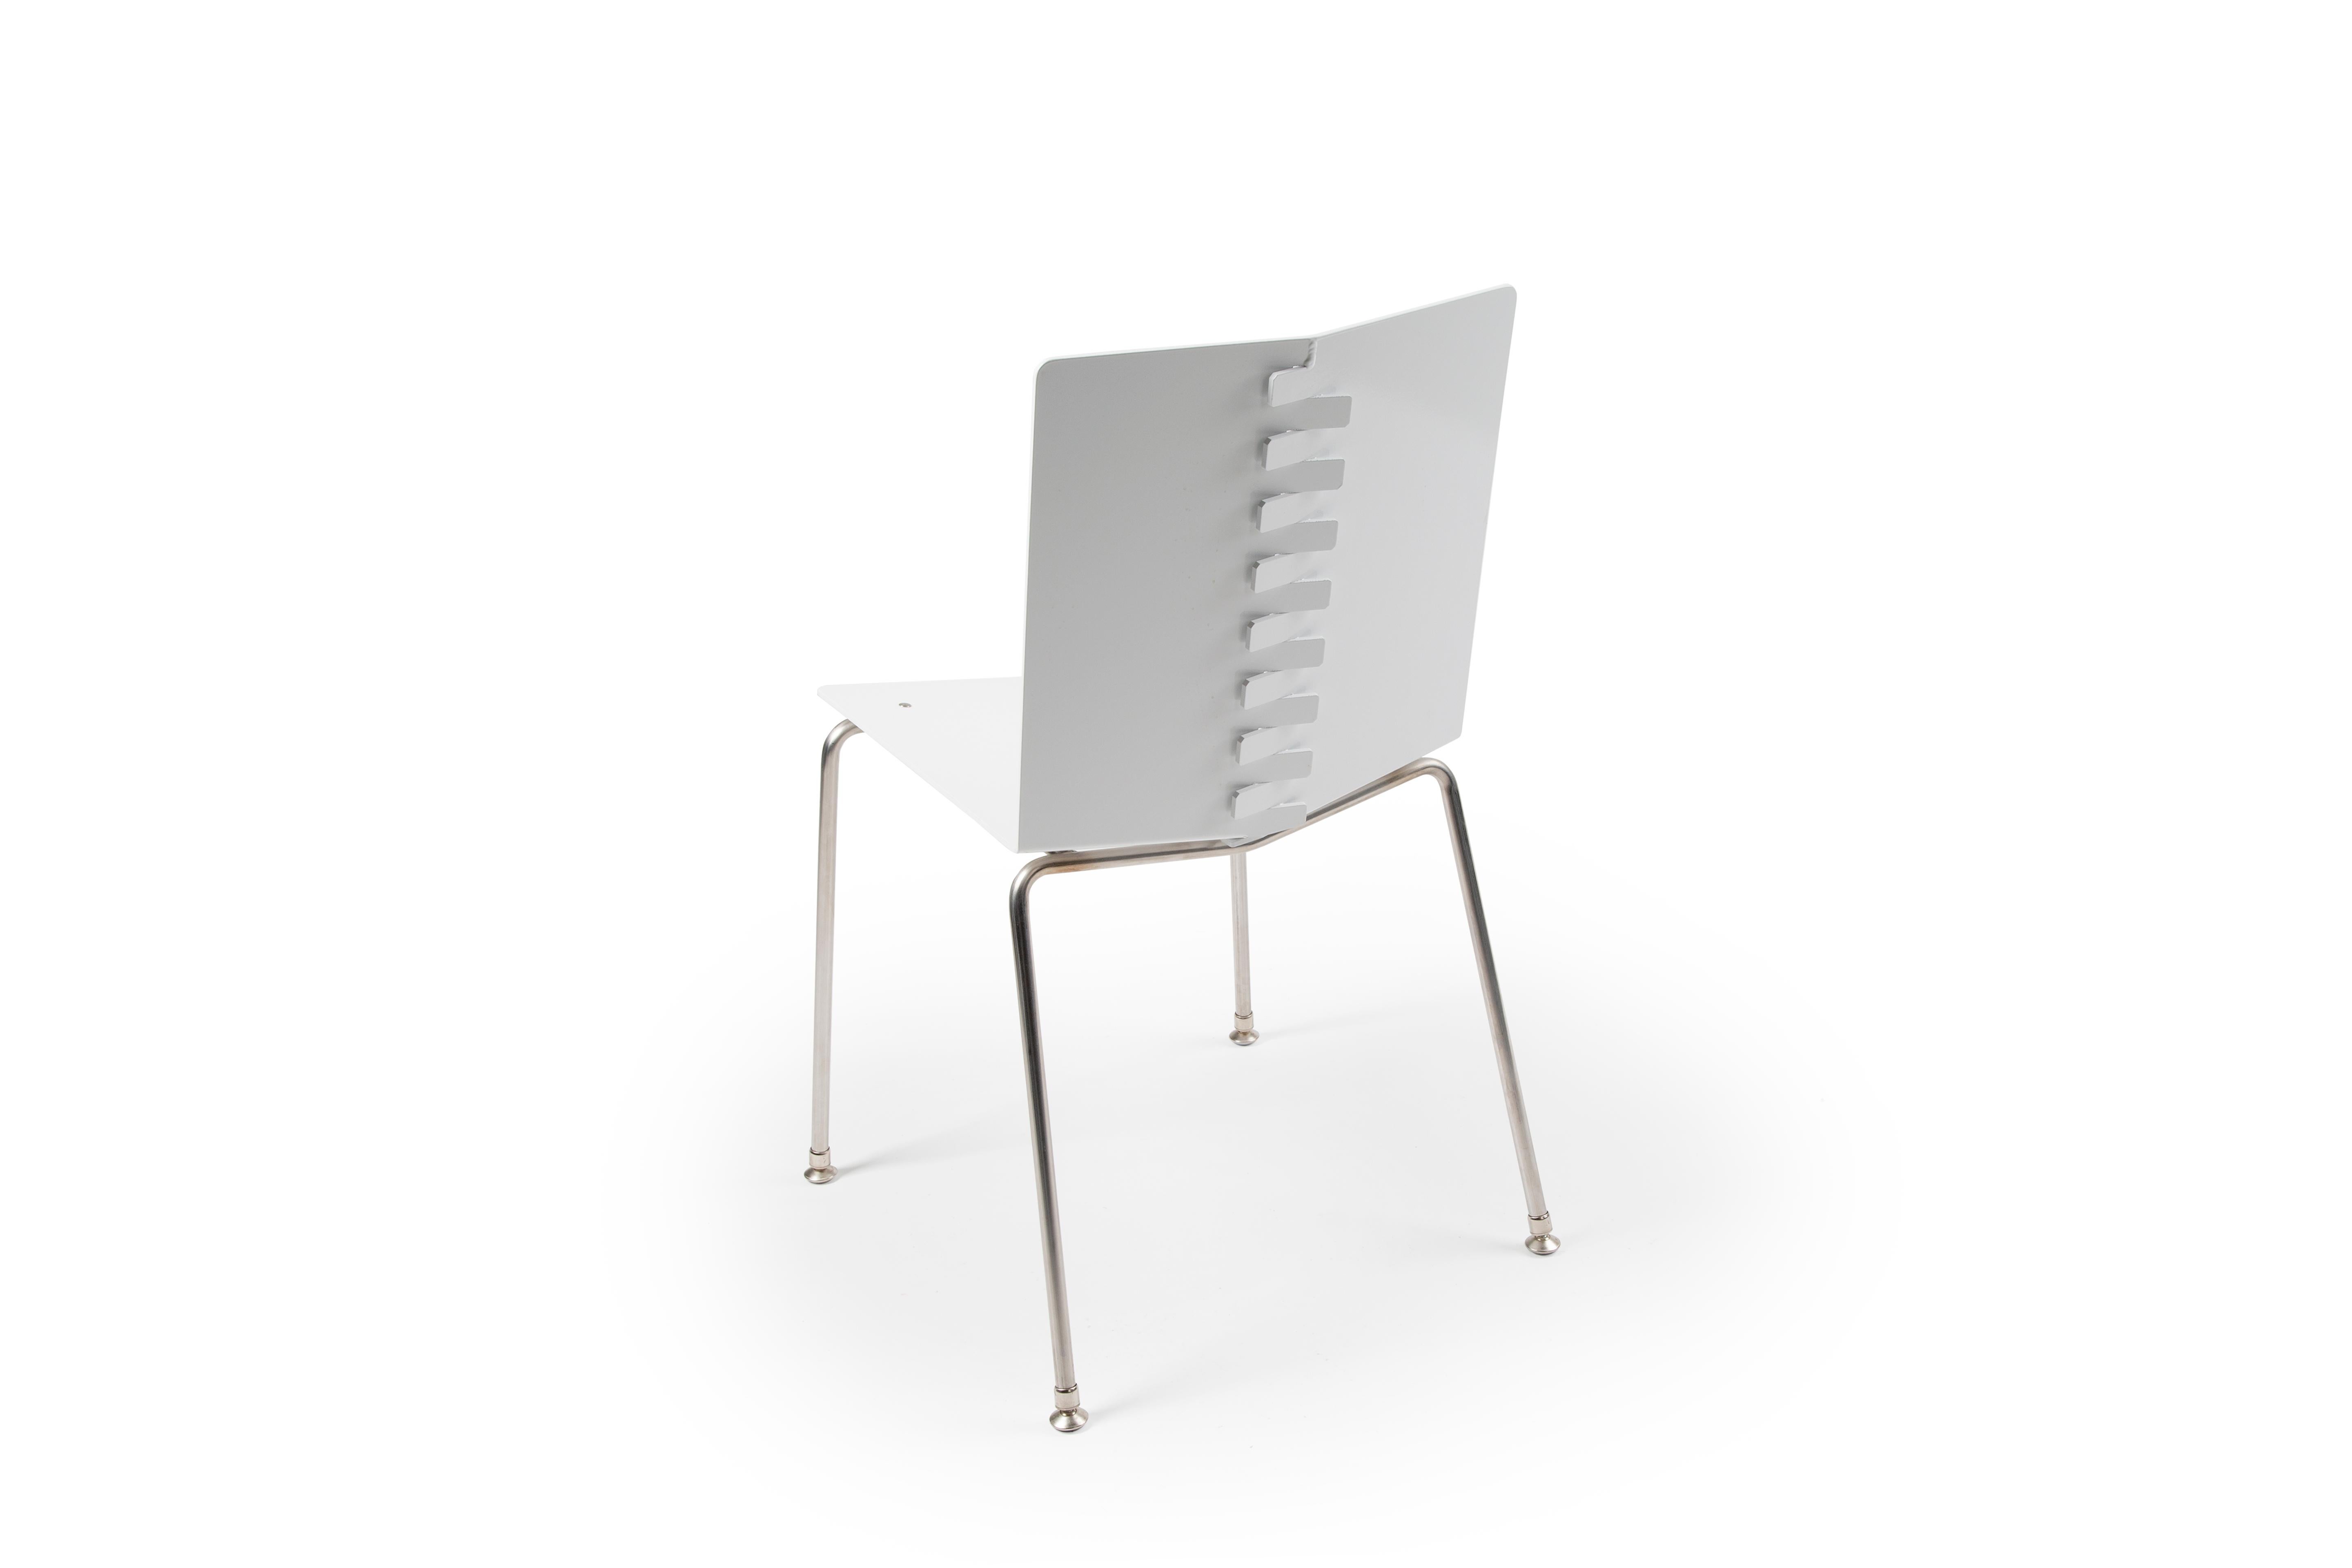 American Minimal Modern Exterior Dining Chair Powder Coated with Stainless Steel Legs For Sale